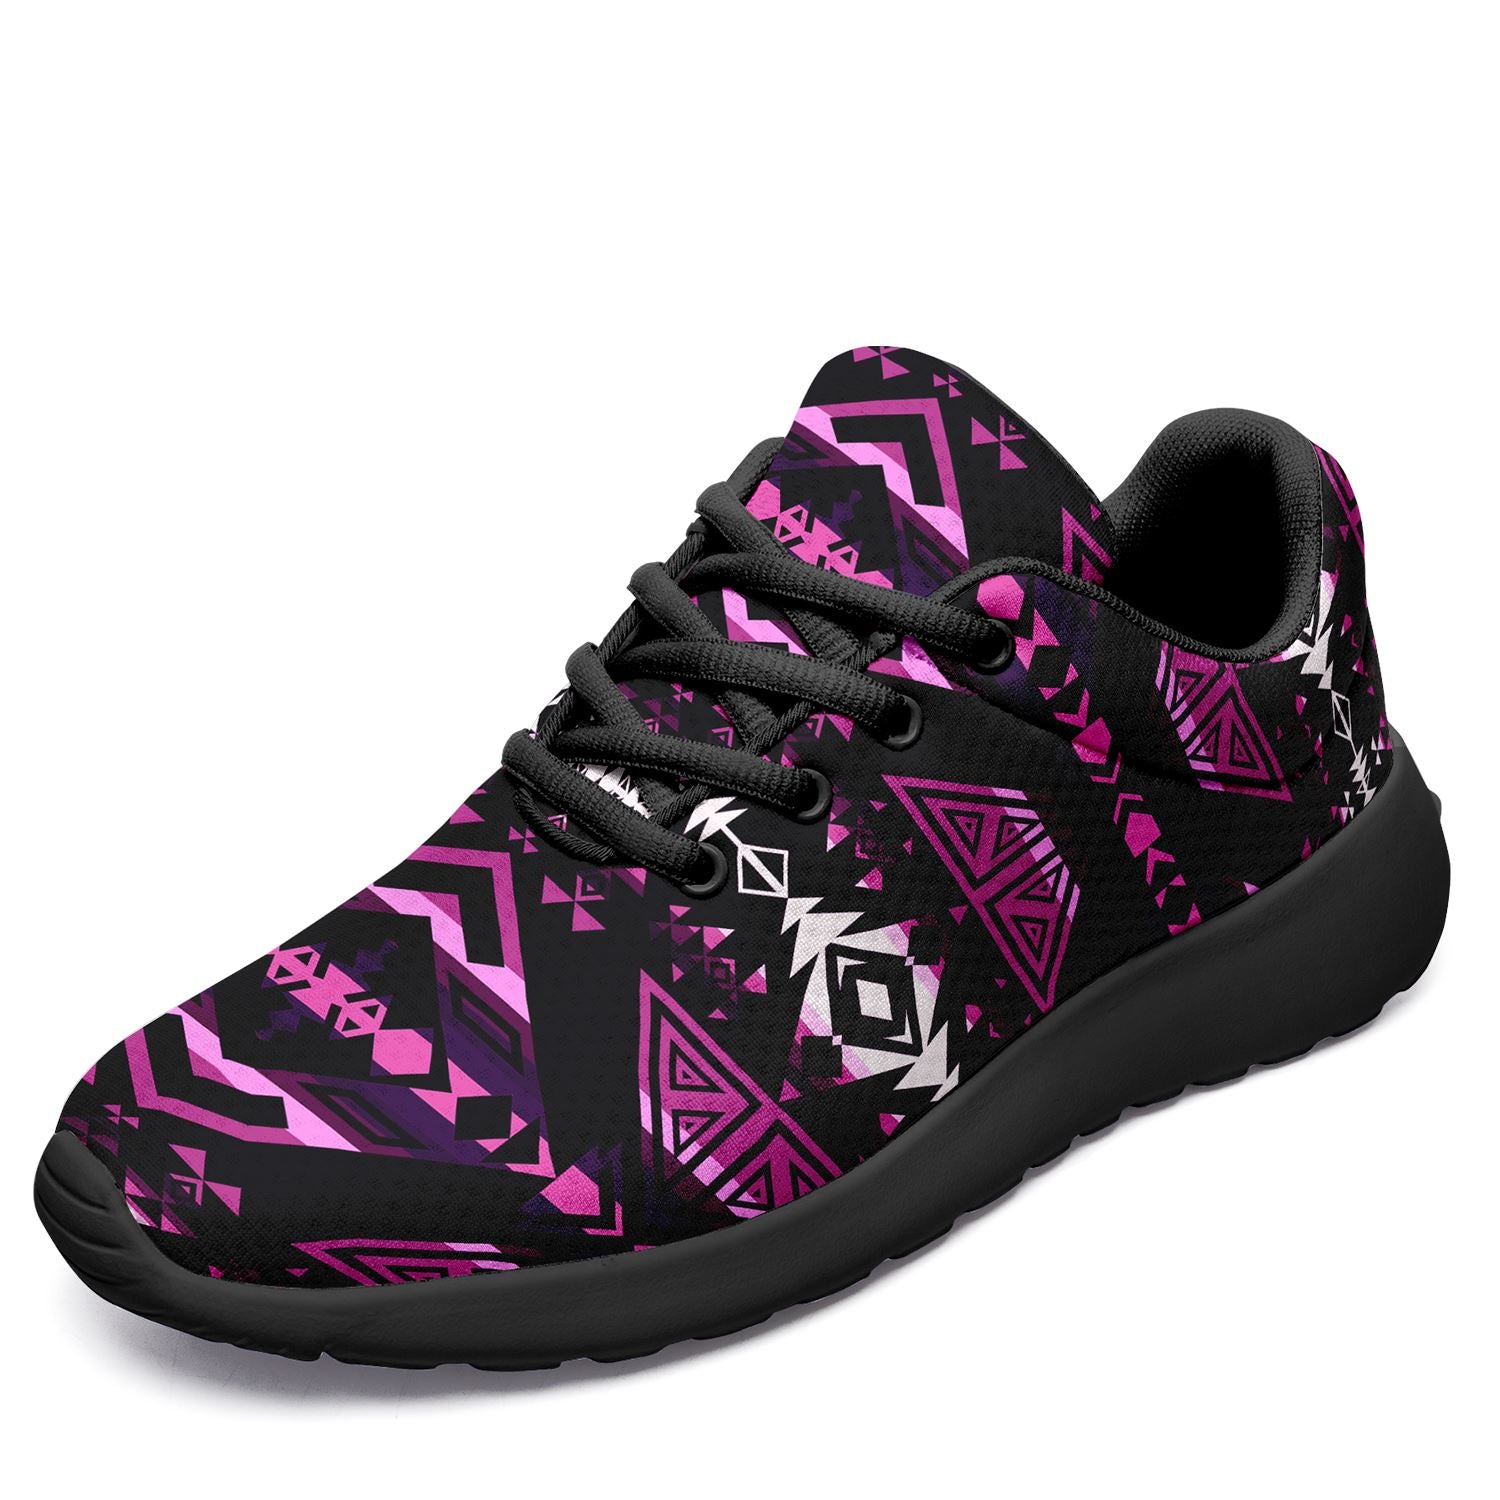 Upstream Expedition Moonlight Shadows Ikkaayi Sport Sneakers 49 Dzine US Women 4.5 / US Youth 3.5 / EUR 35 Black Sole 